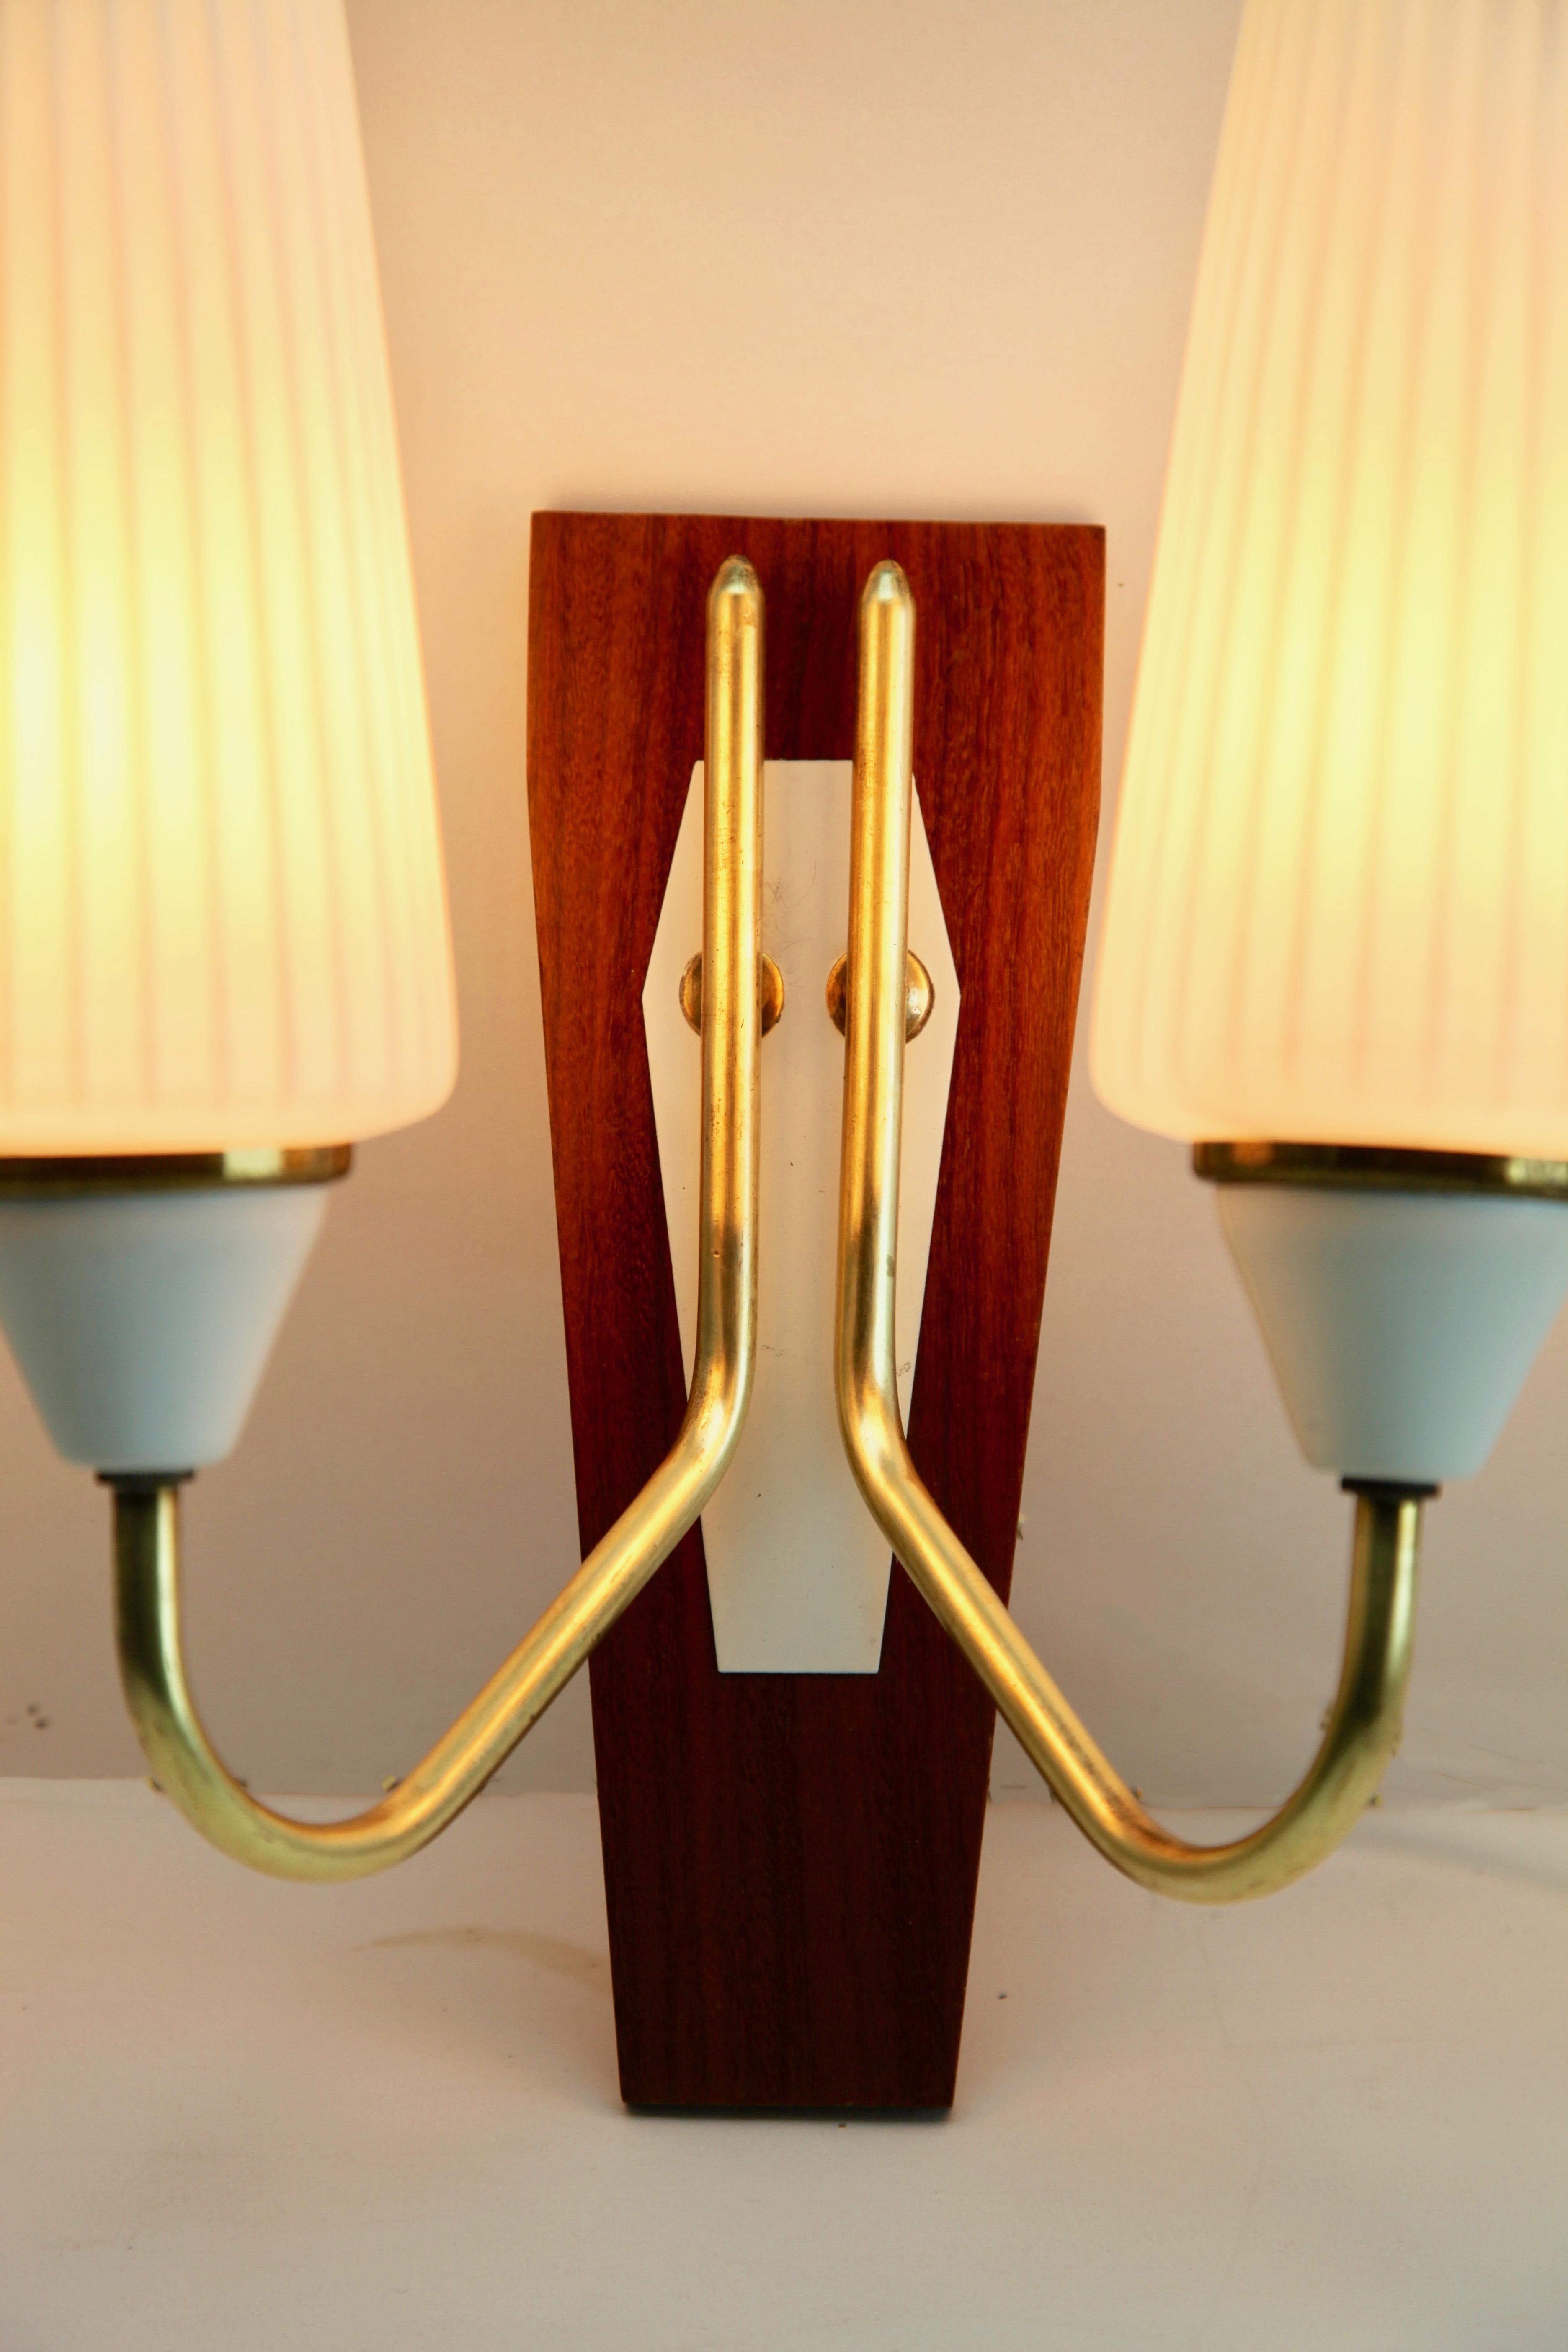 Machine-Made Vintage 2 Arms Wall Mount Lamp in the Style of Stilnovo, Italian, 1960s